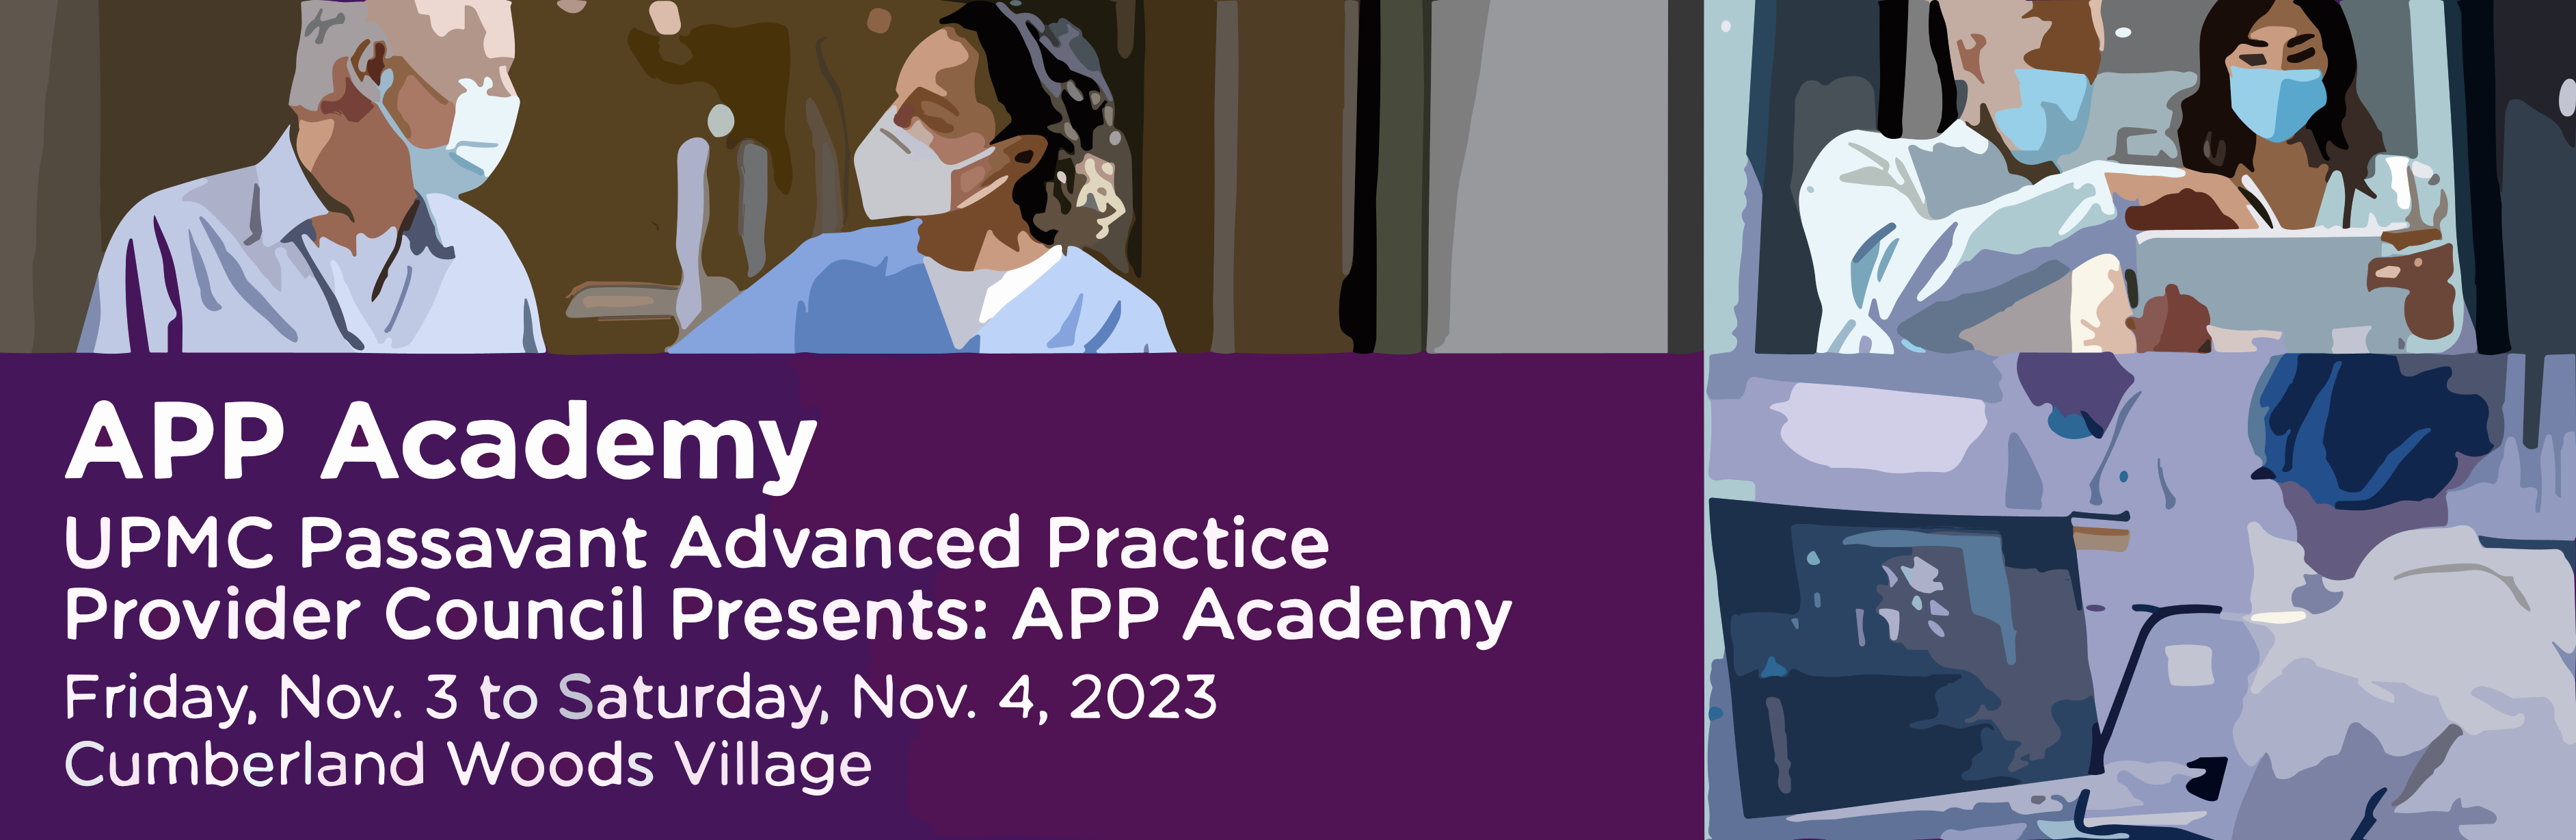 "A graphic advertising the APP Academy event"